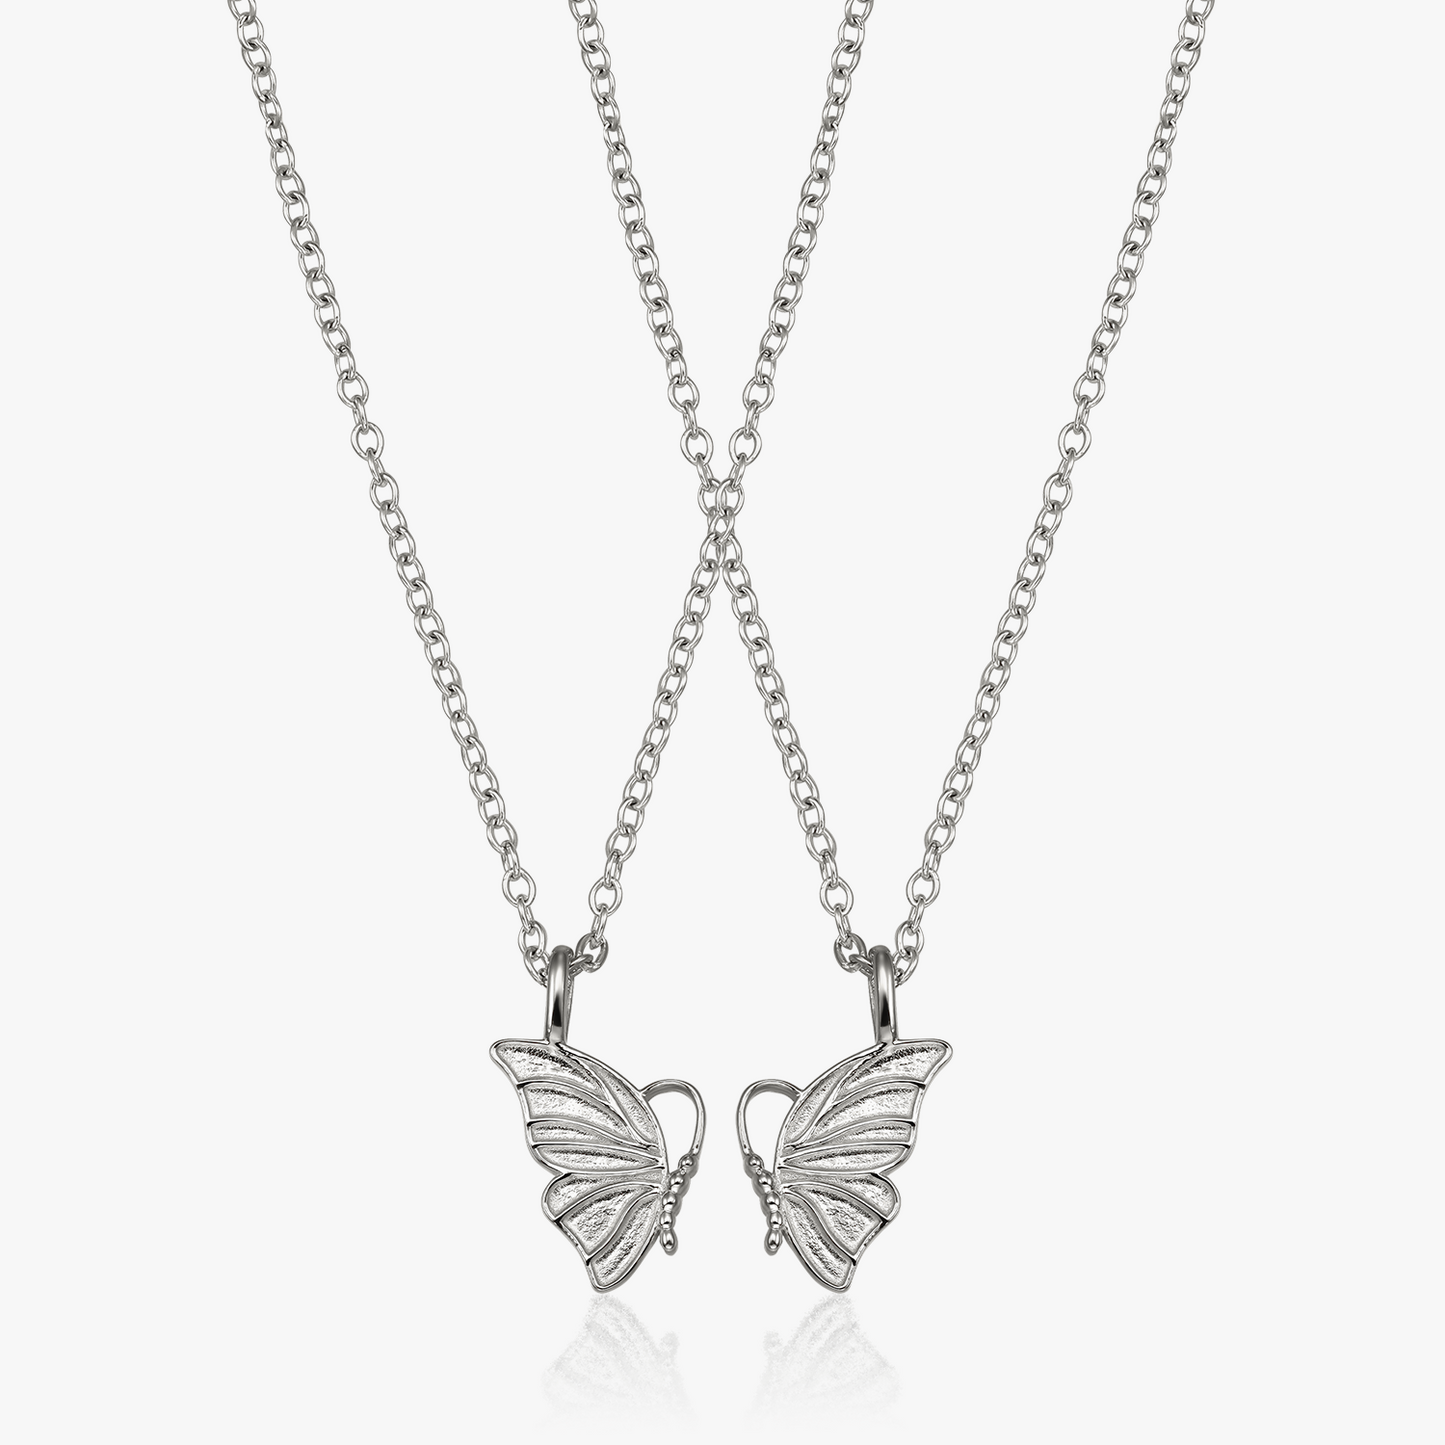 Bestfriends Silver Necklaces - You Gave Me Wings